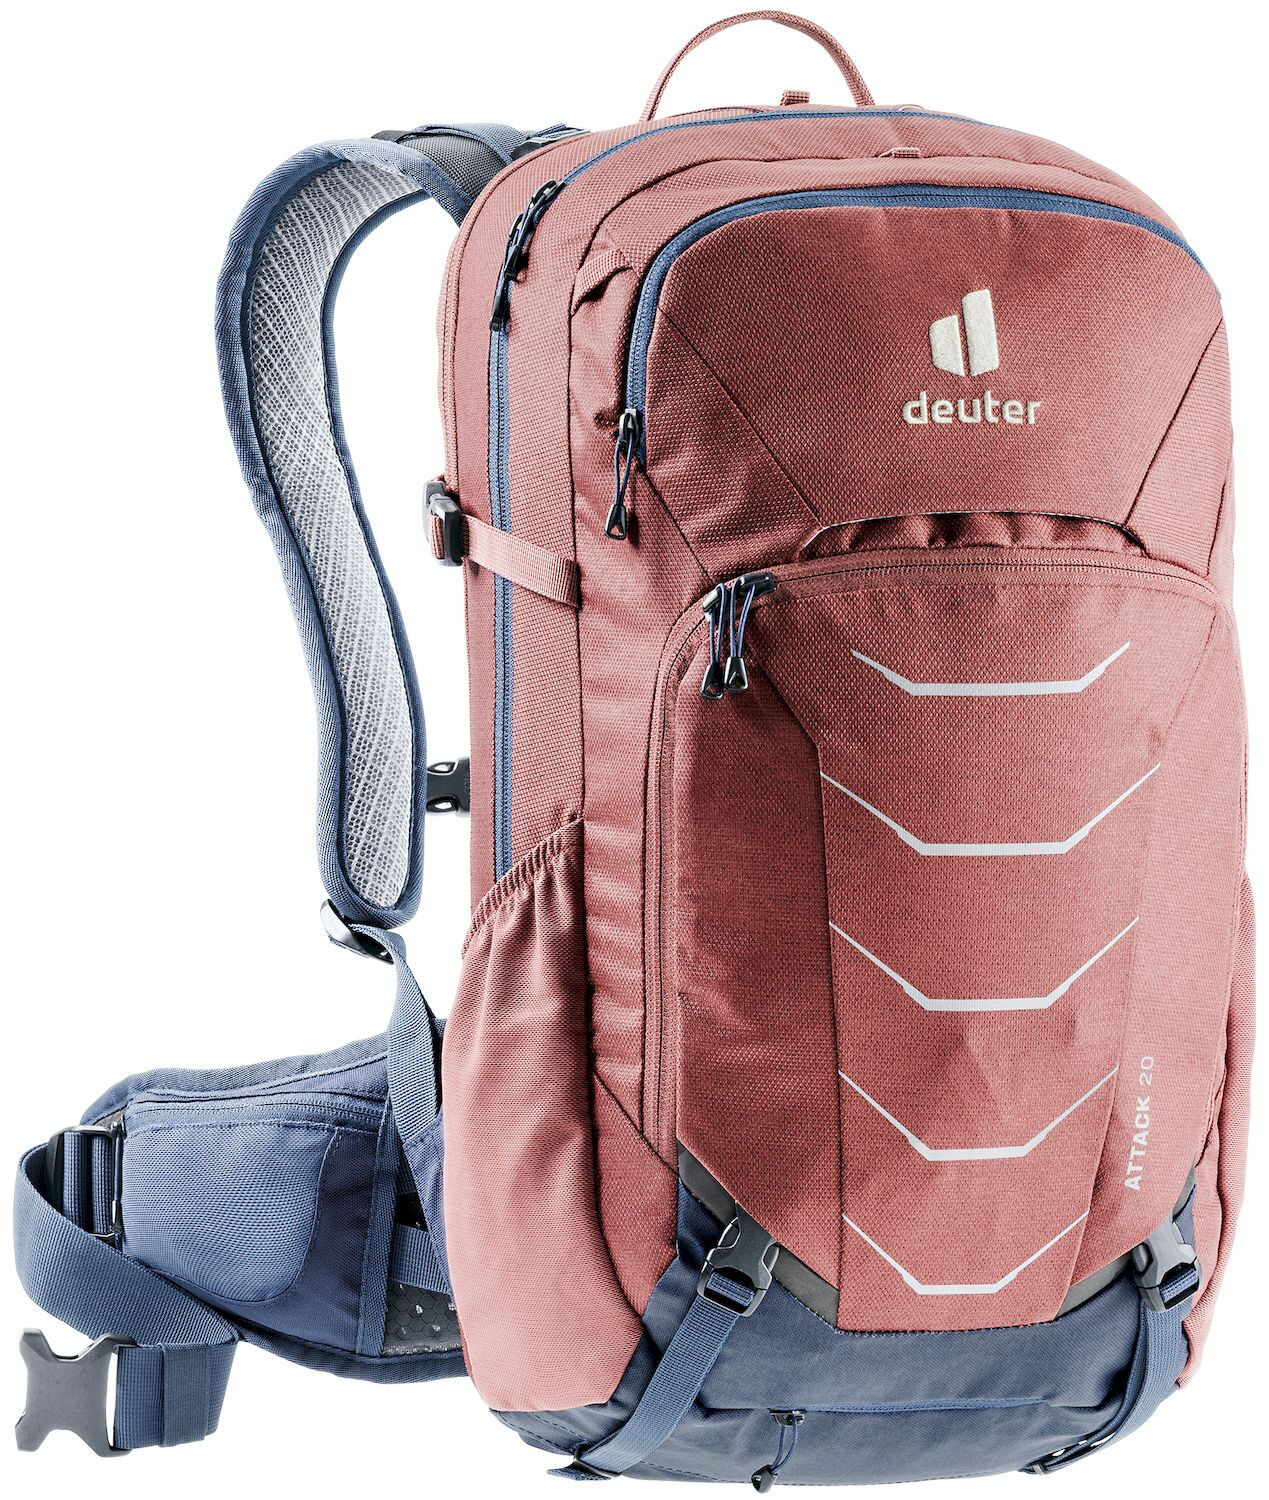 Deuter Attack 20 - Cycling backpack - Men's